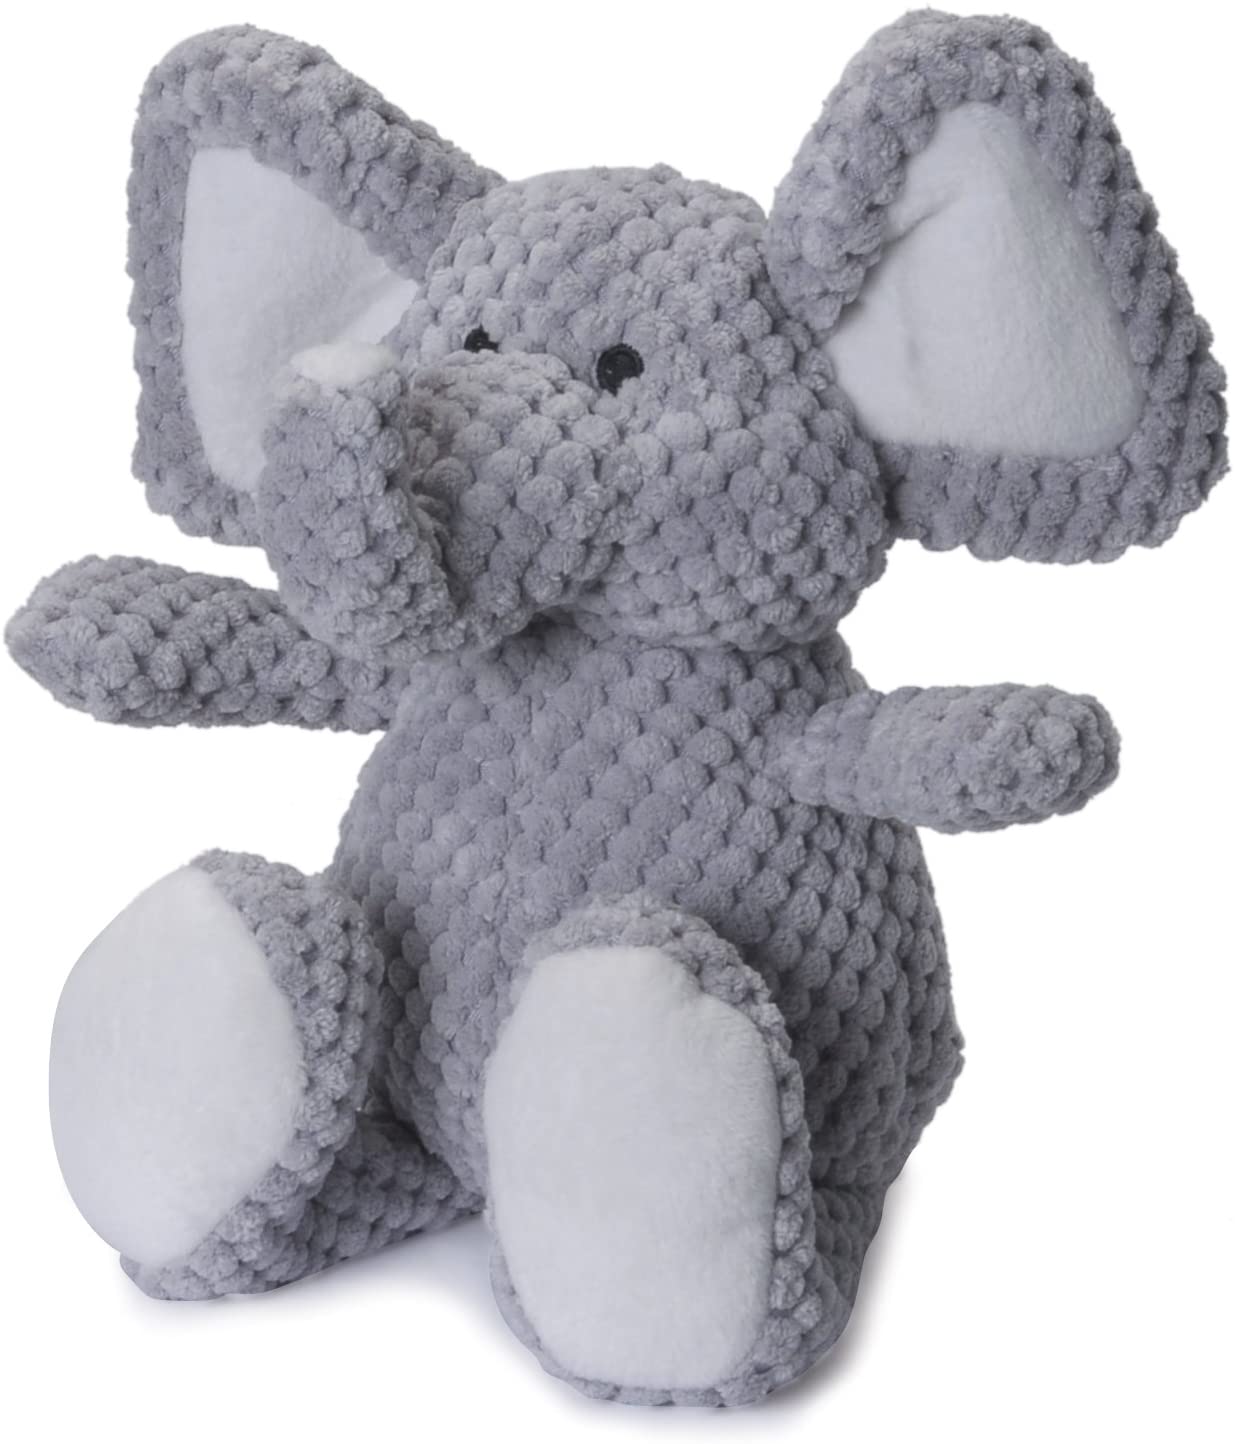 goDog® Checkers™ Elephant with Chew Guard Technology™, Durable Plush Squeaker Dog Toy, Gray, Large